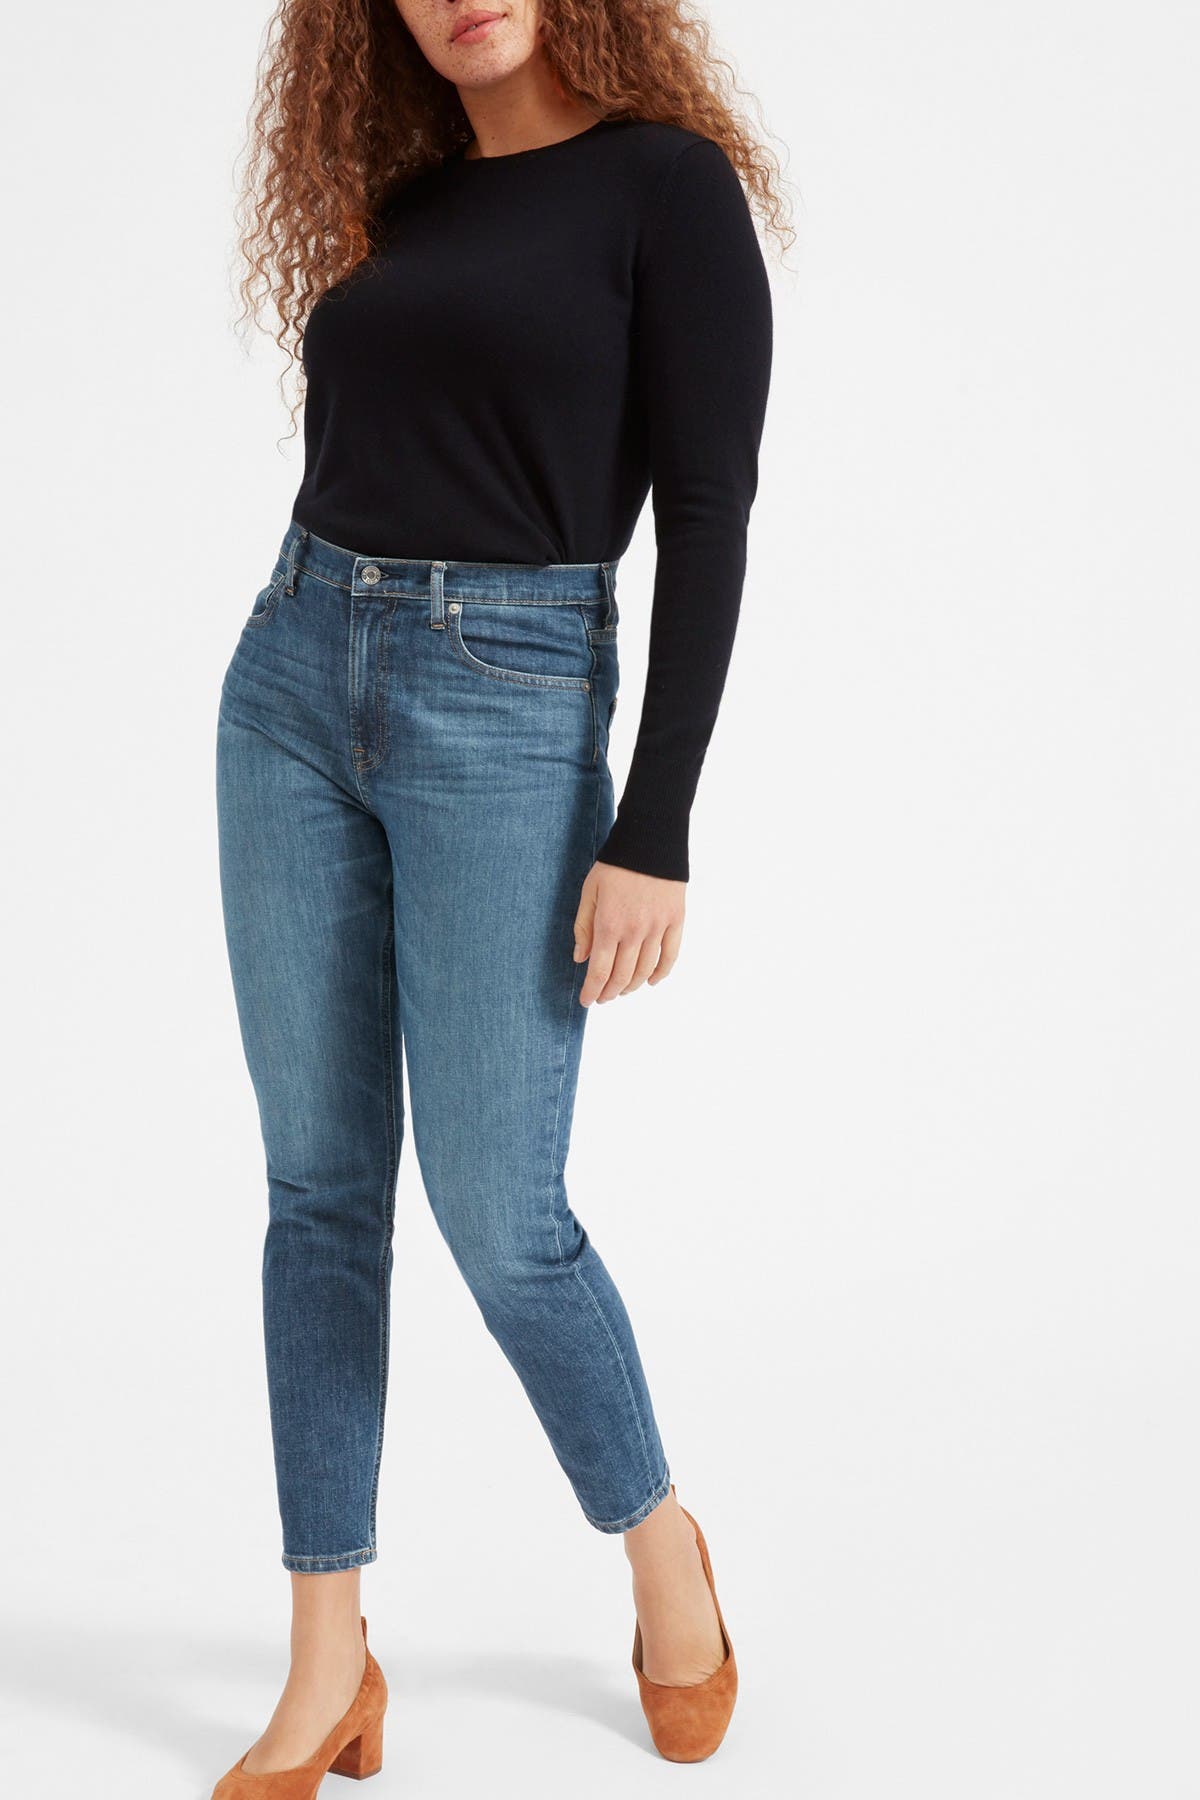 everlane ankle jeans